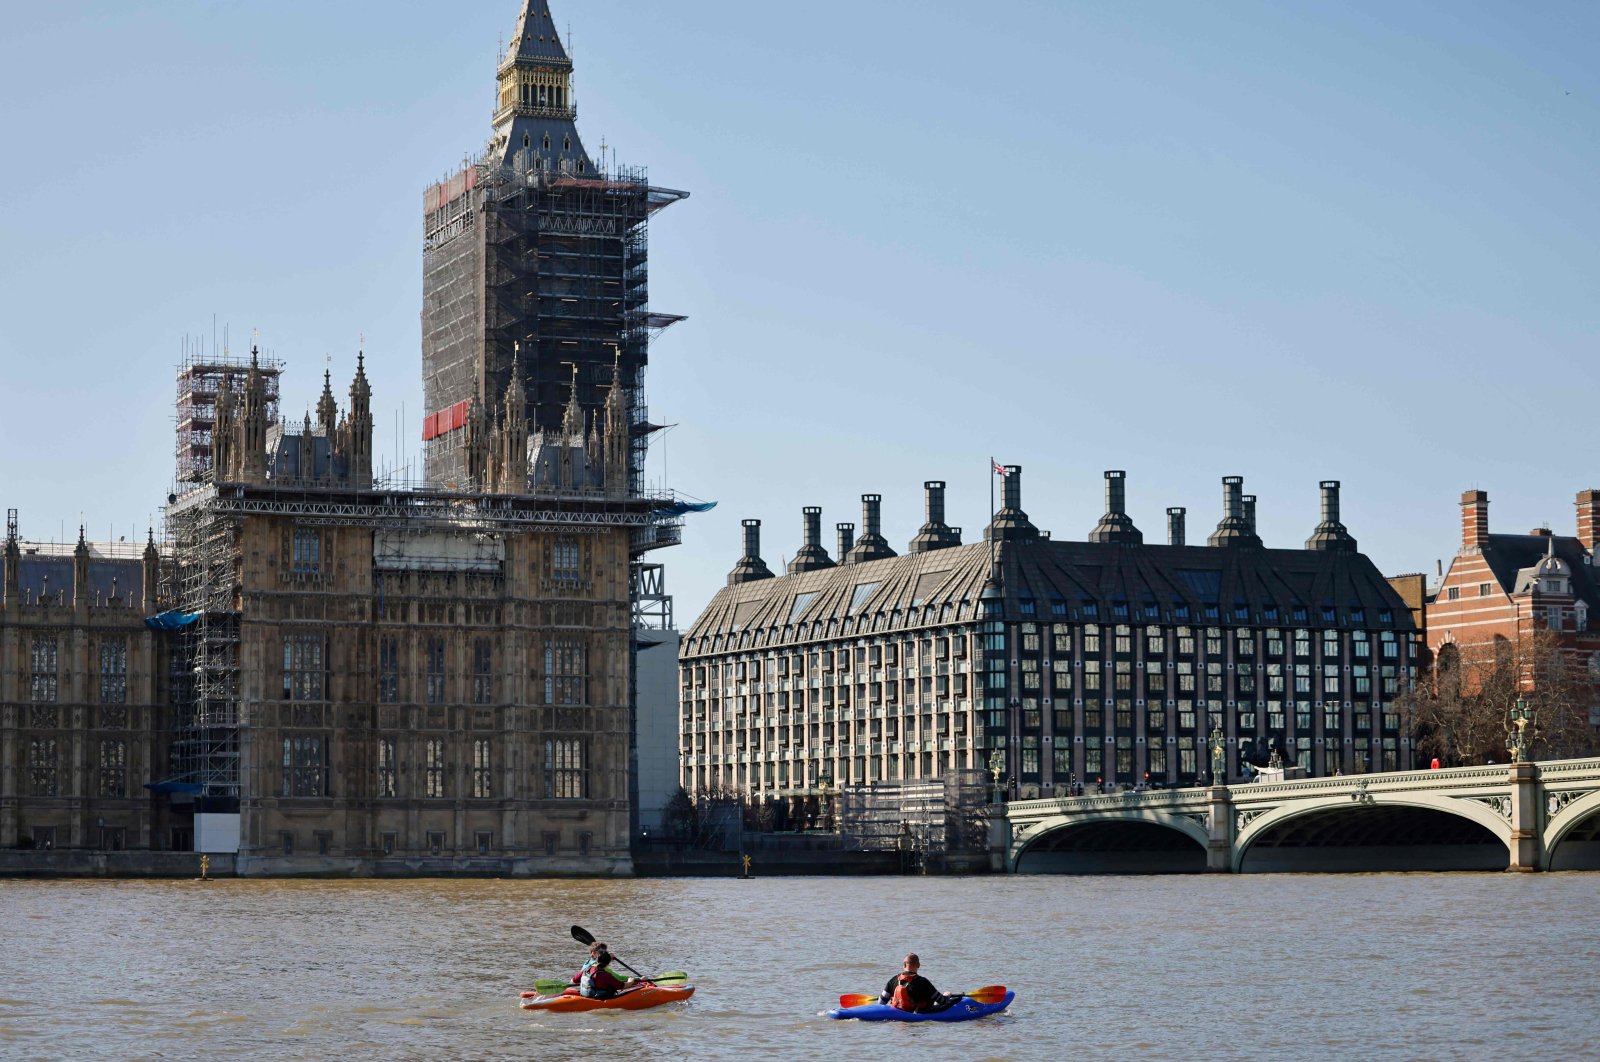 Kayakers pass the Palace of Westminster, home to the Houses of Parliament on the River Thames as England's third COVID-19 lockdown restrictions ease, London, U.K., March 29, 2021. (AFP Photo)